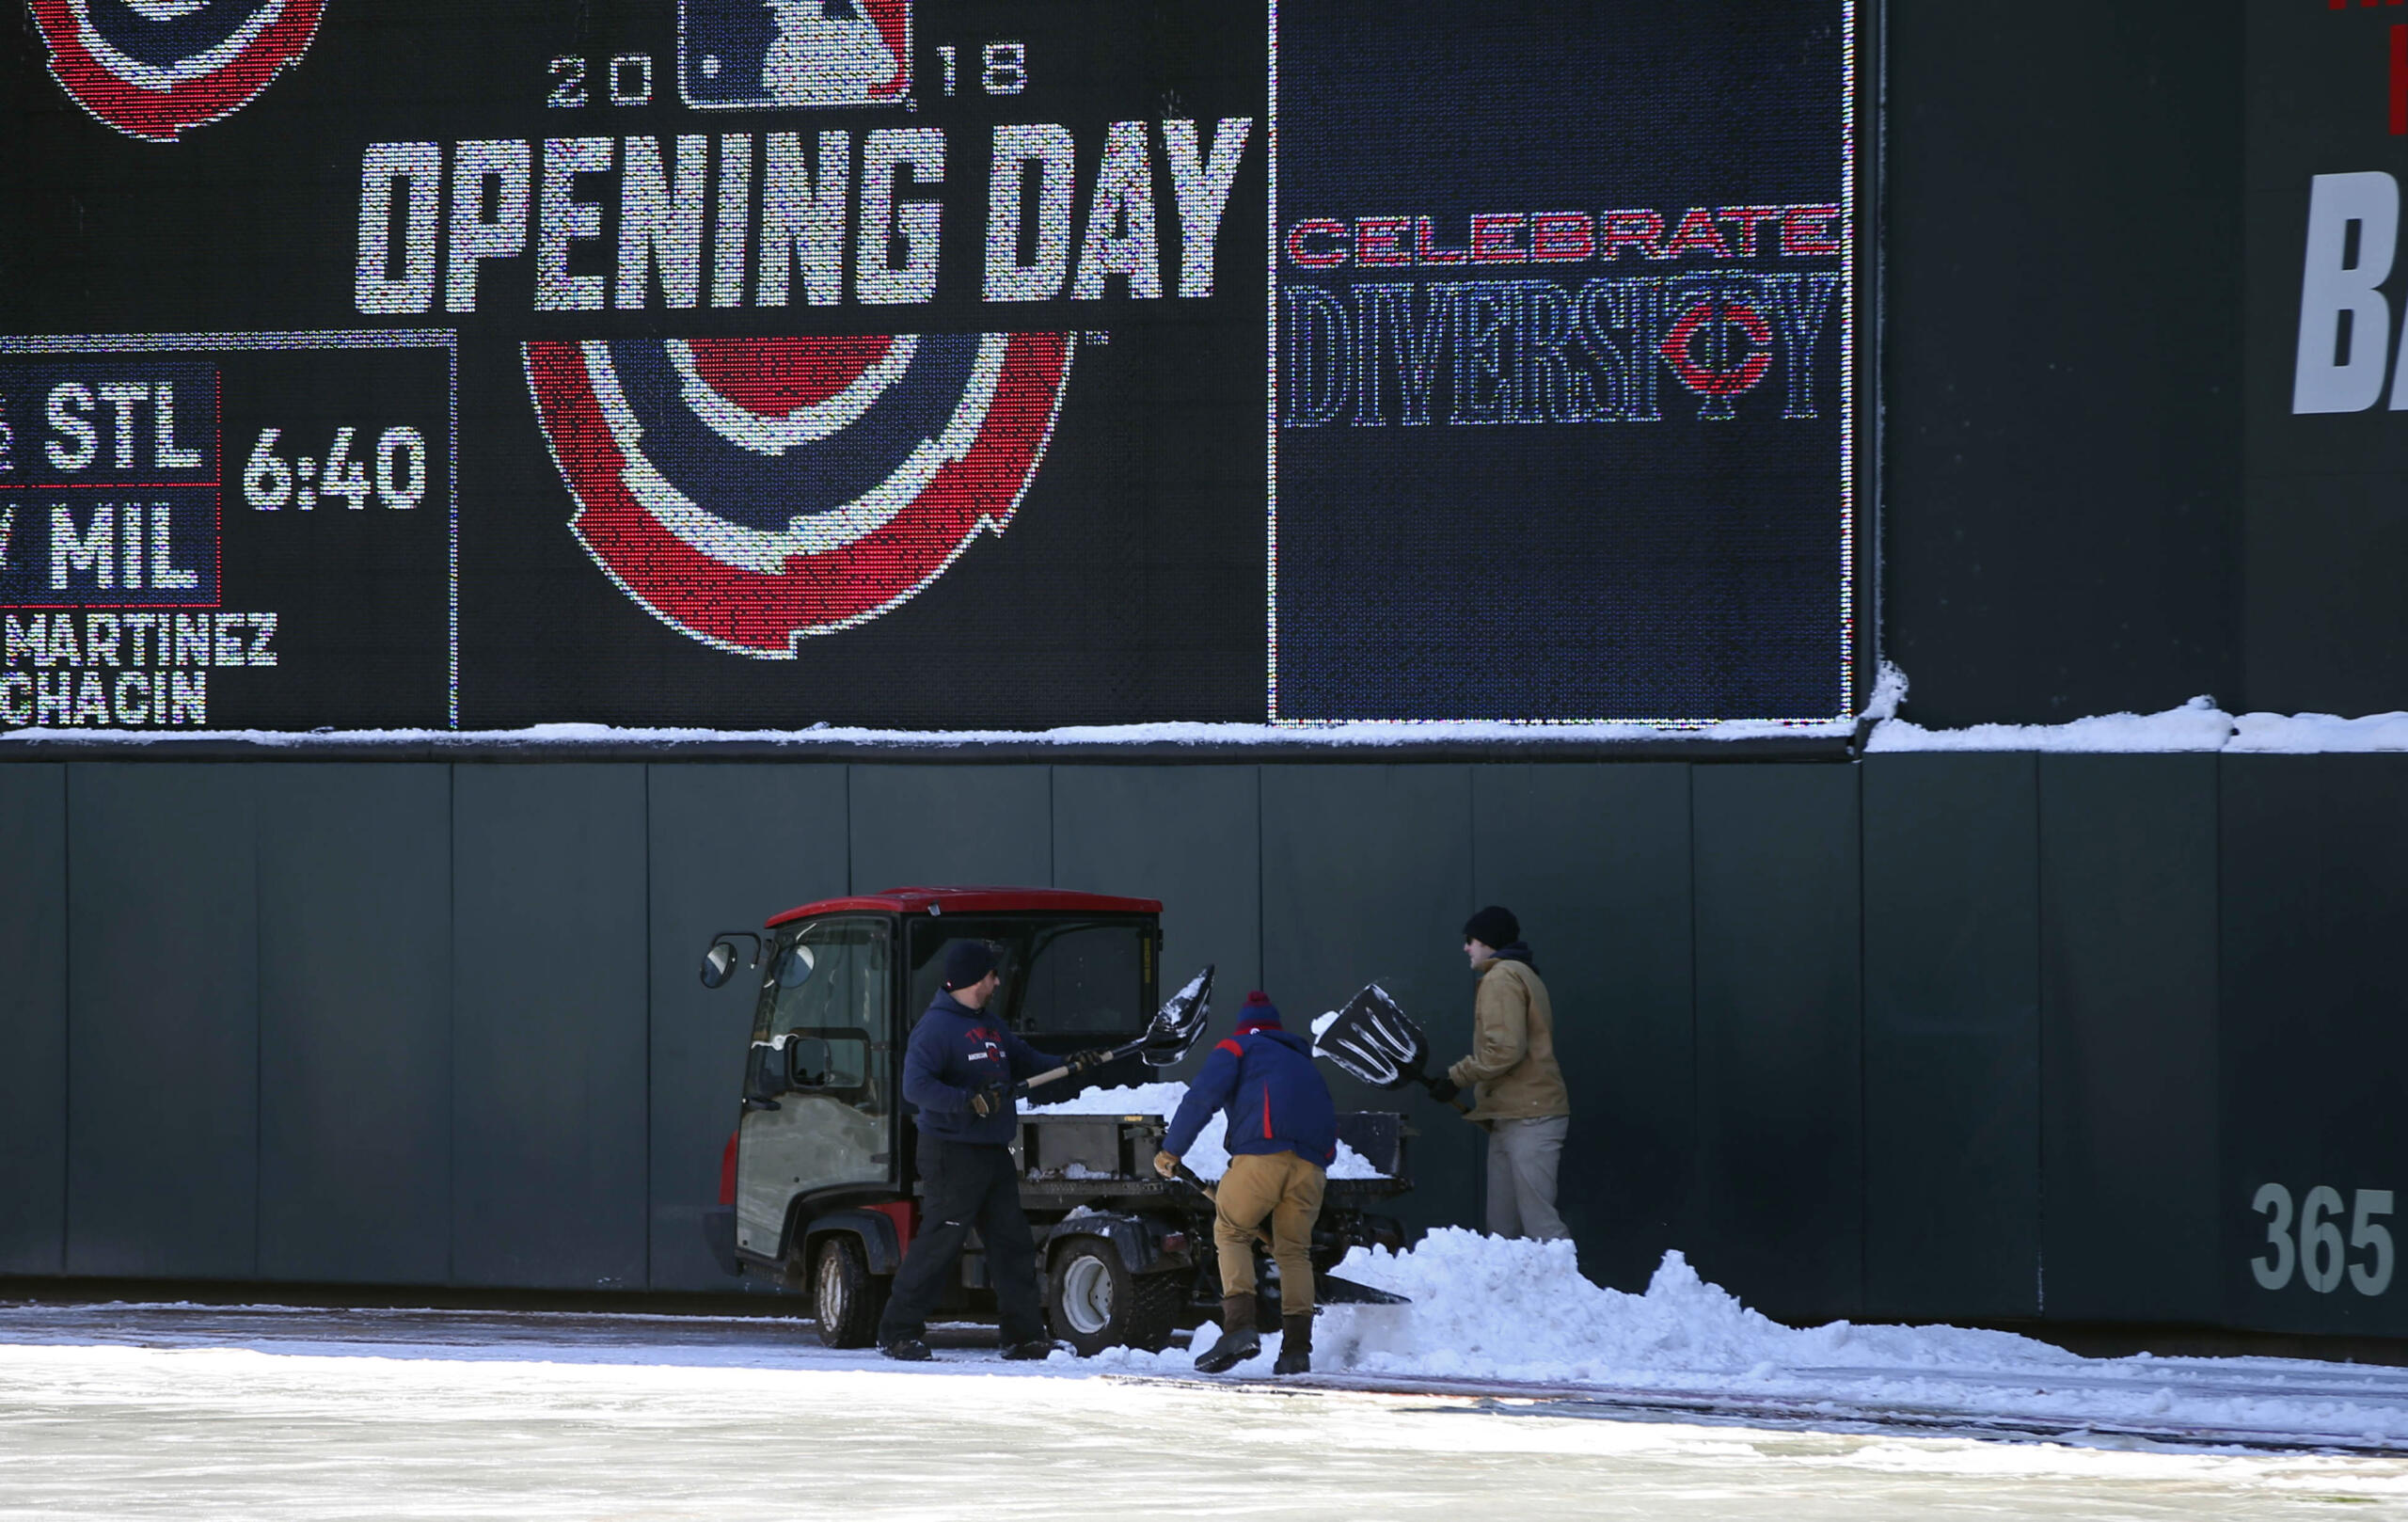 Opening day 2022 at Target Field in Minneapolis has a similar feel to that of 2018. The 2022 opening day game between the Seattle Mariners and Minnesota Twins, scheduled for Thursday, April 7, 2022, has been postponed to Friday, April 8.